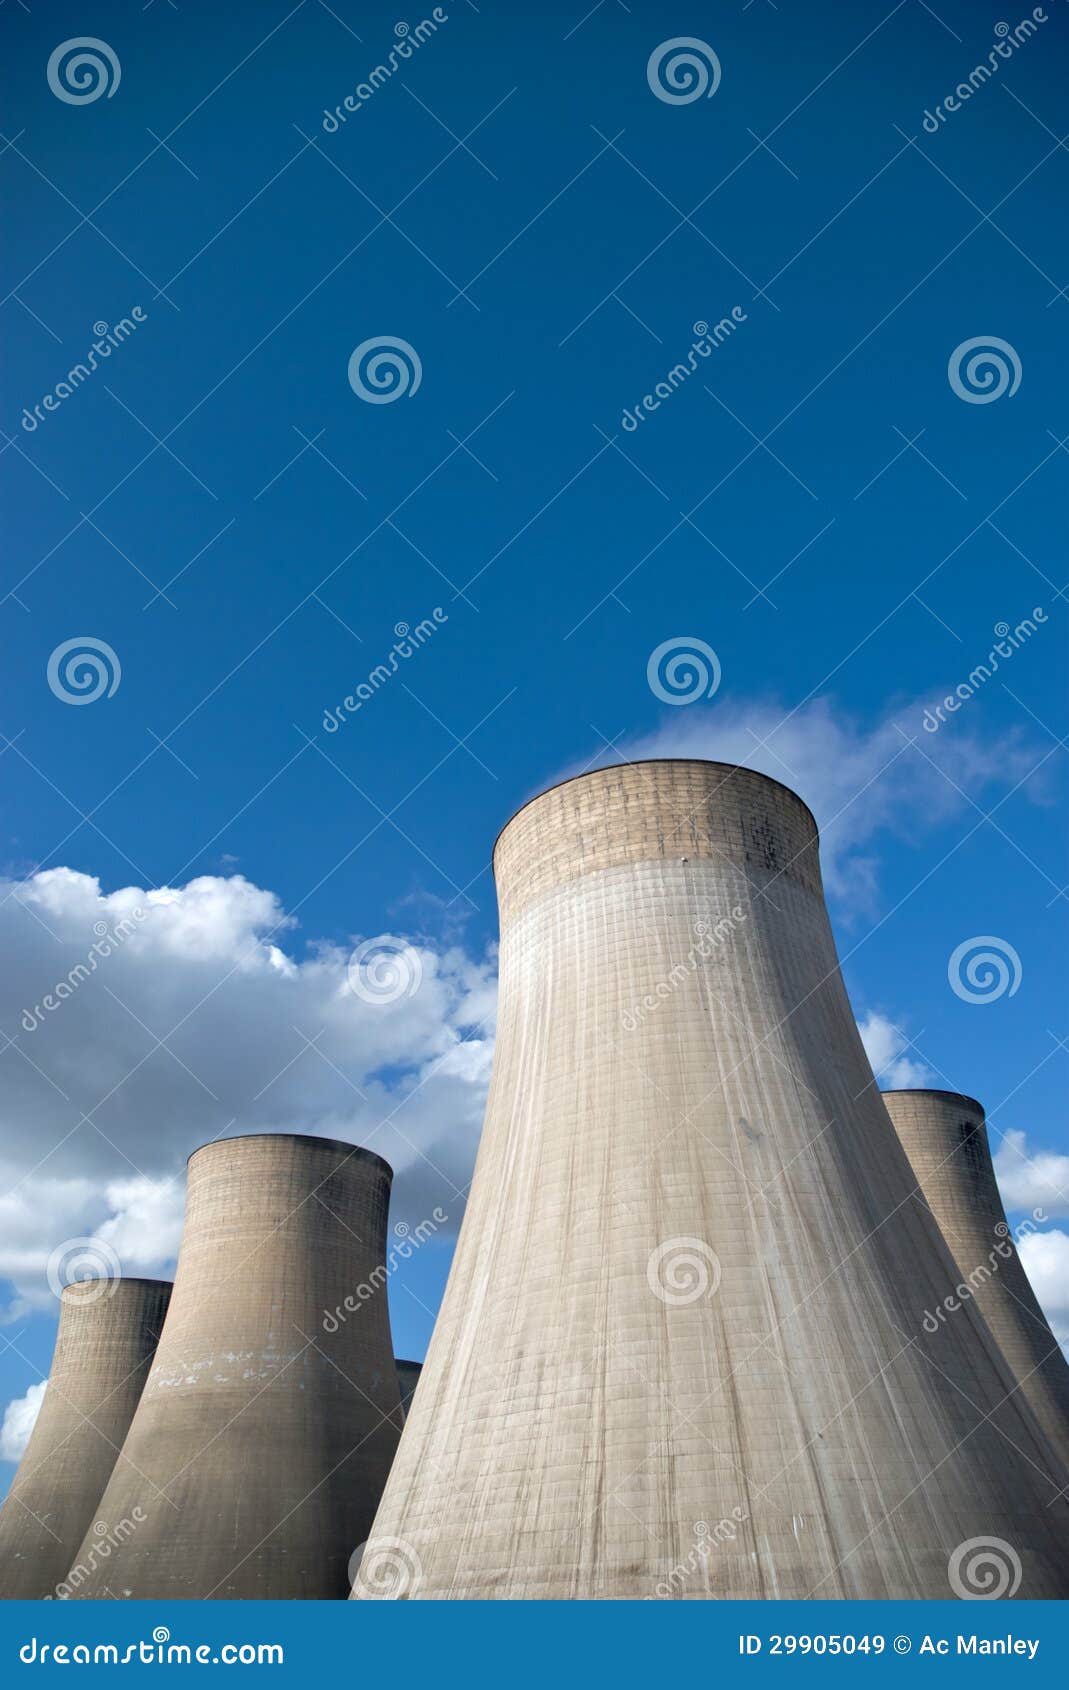 cooling towers of a coal fired power station again